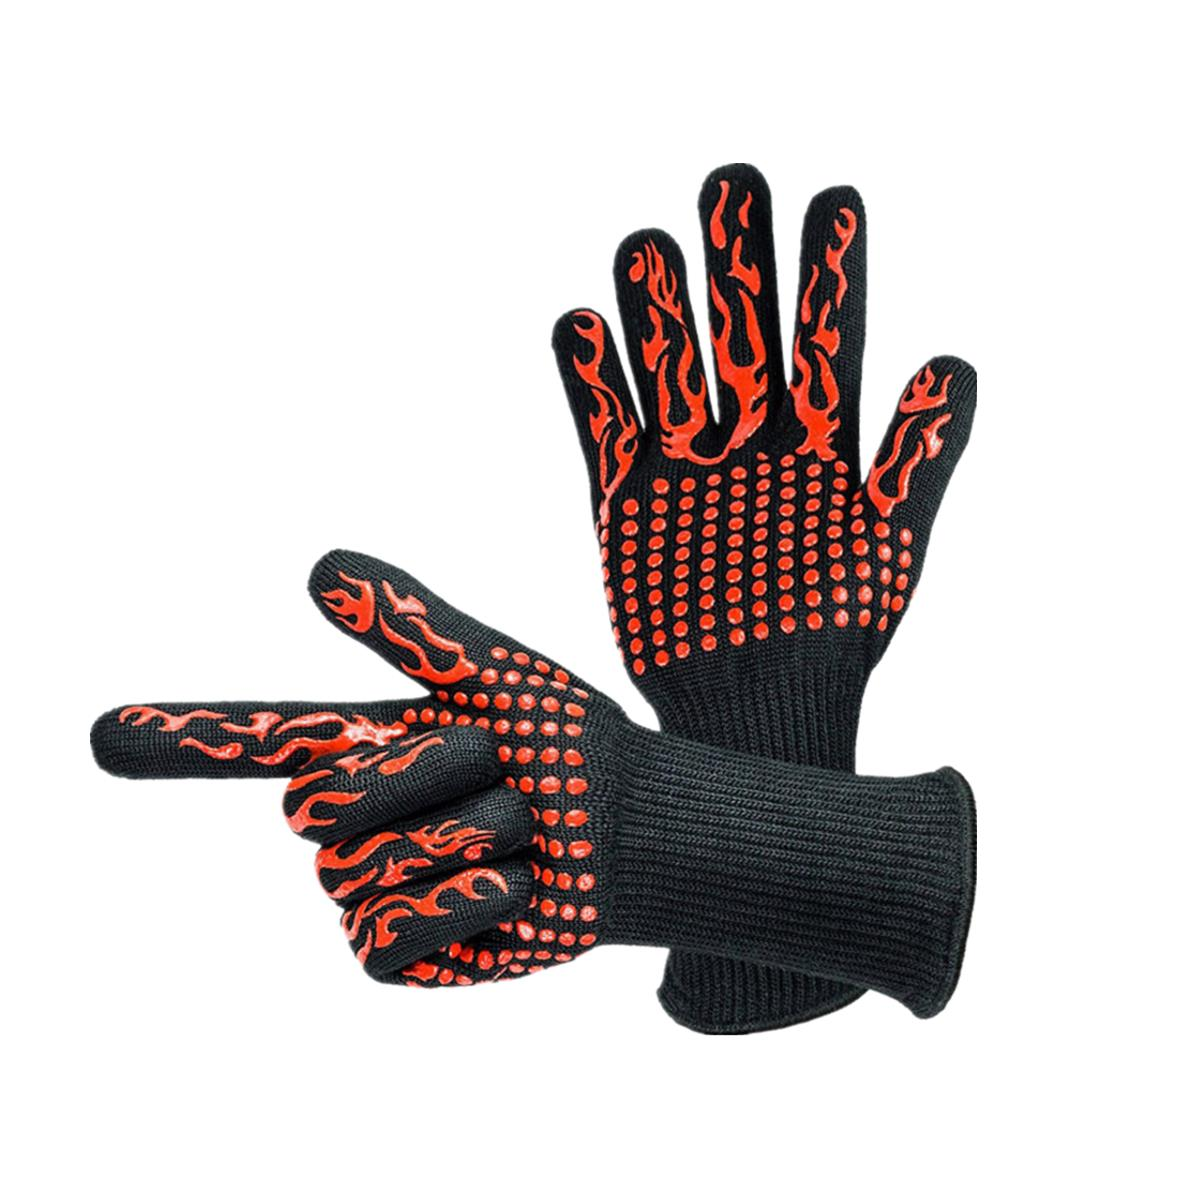 1 Pair 932°F Heat Resistant Barbecue BBQ Grill Gloves Oven Baking Cooking Glove For Men Women